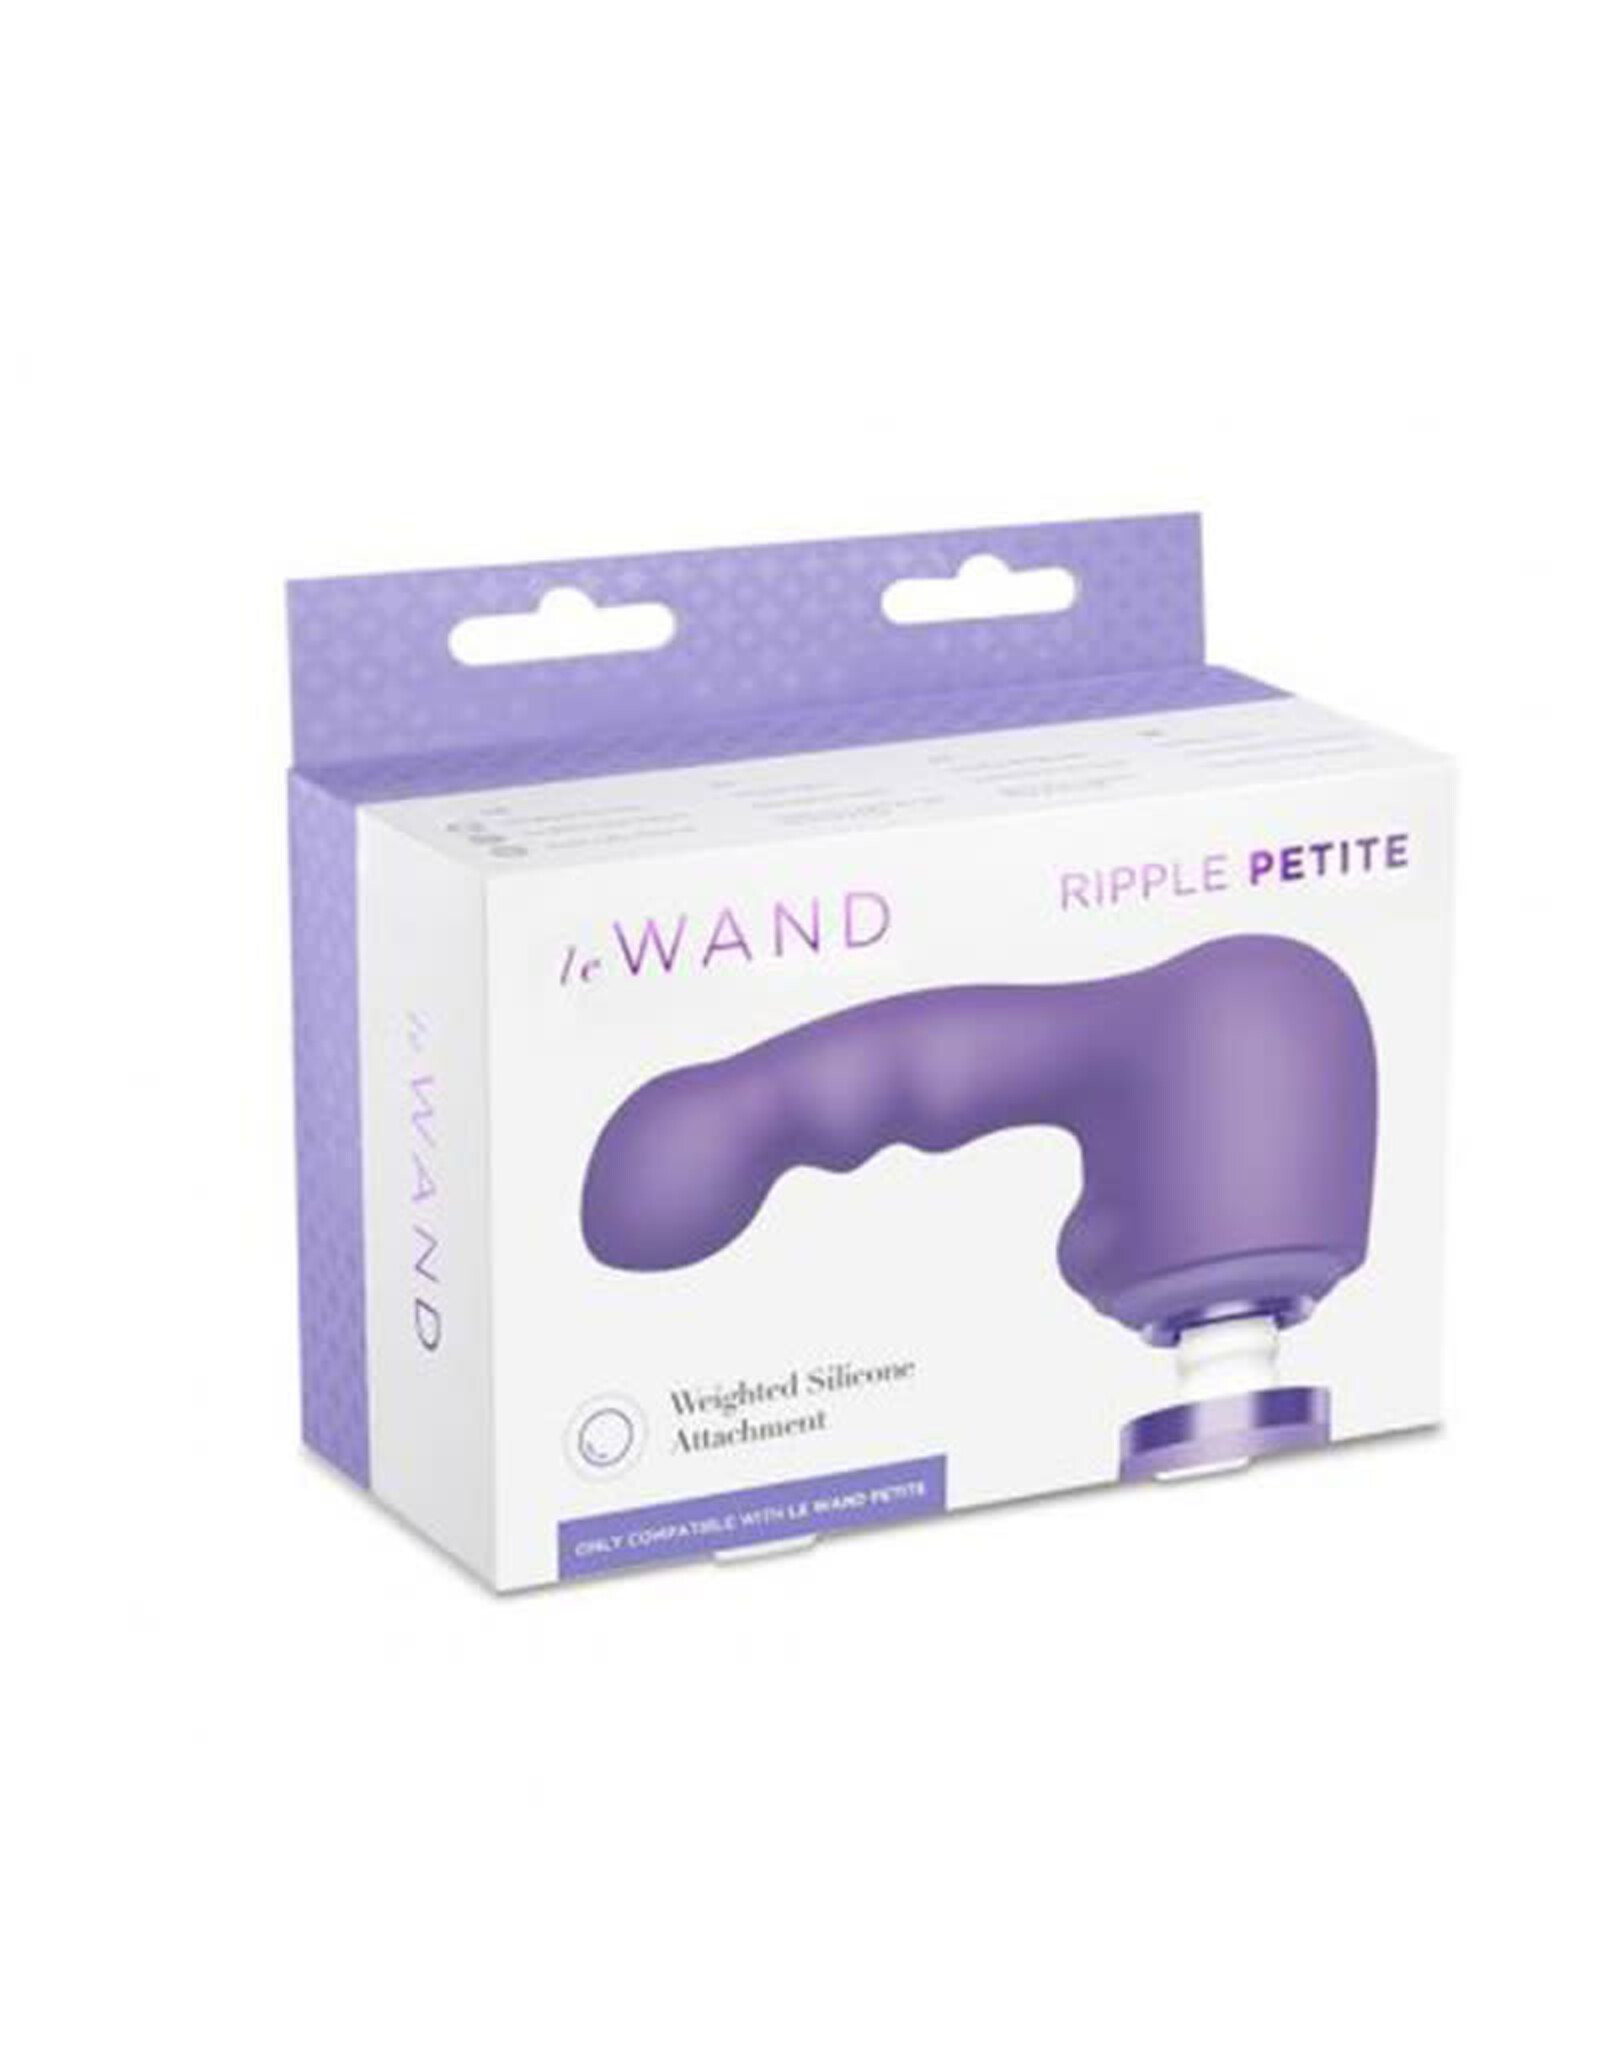 Le Wand Le Wand Silicone Weighted Attachment